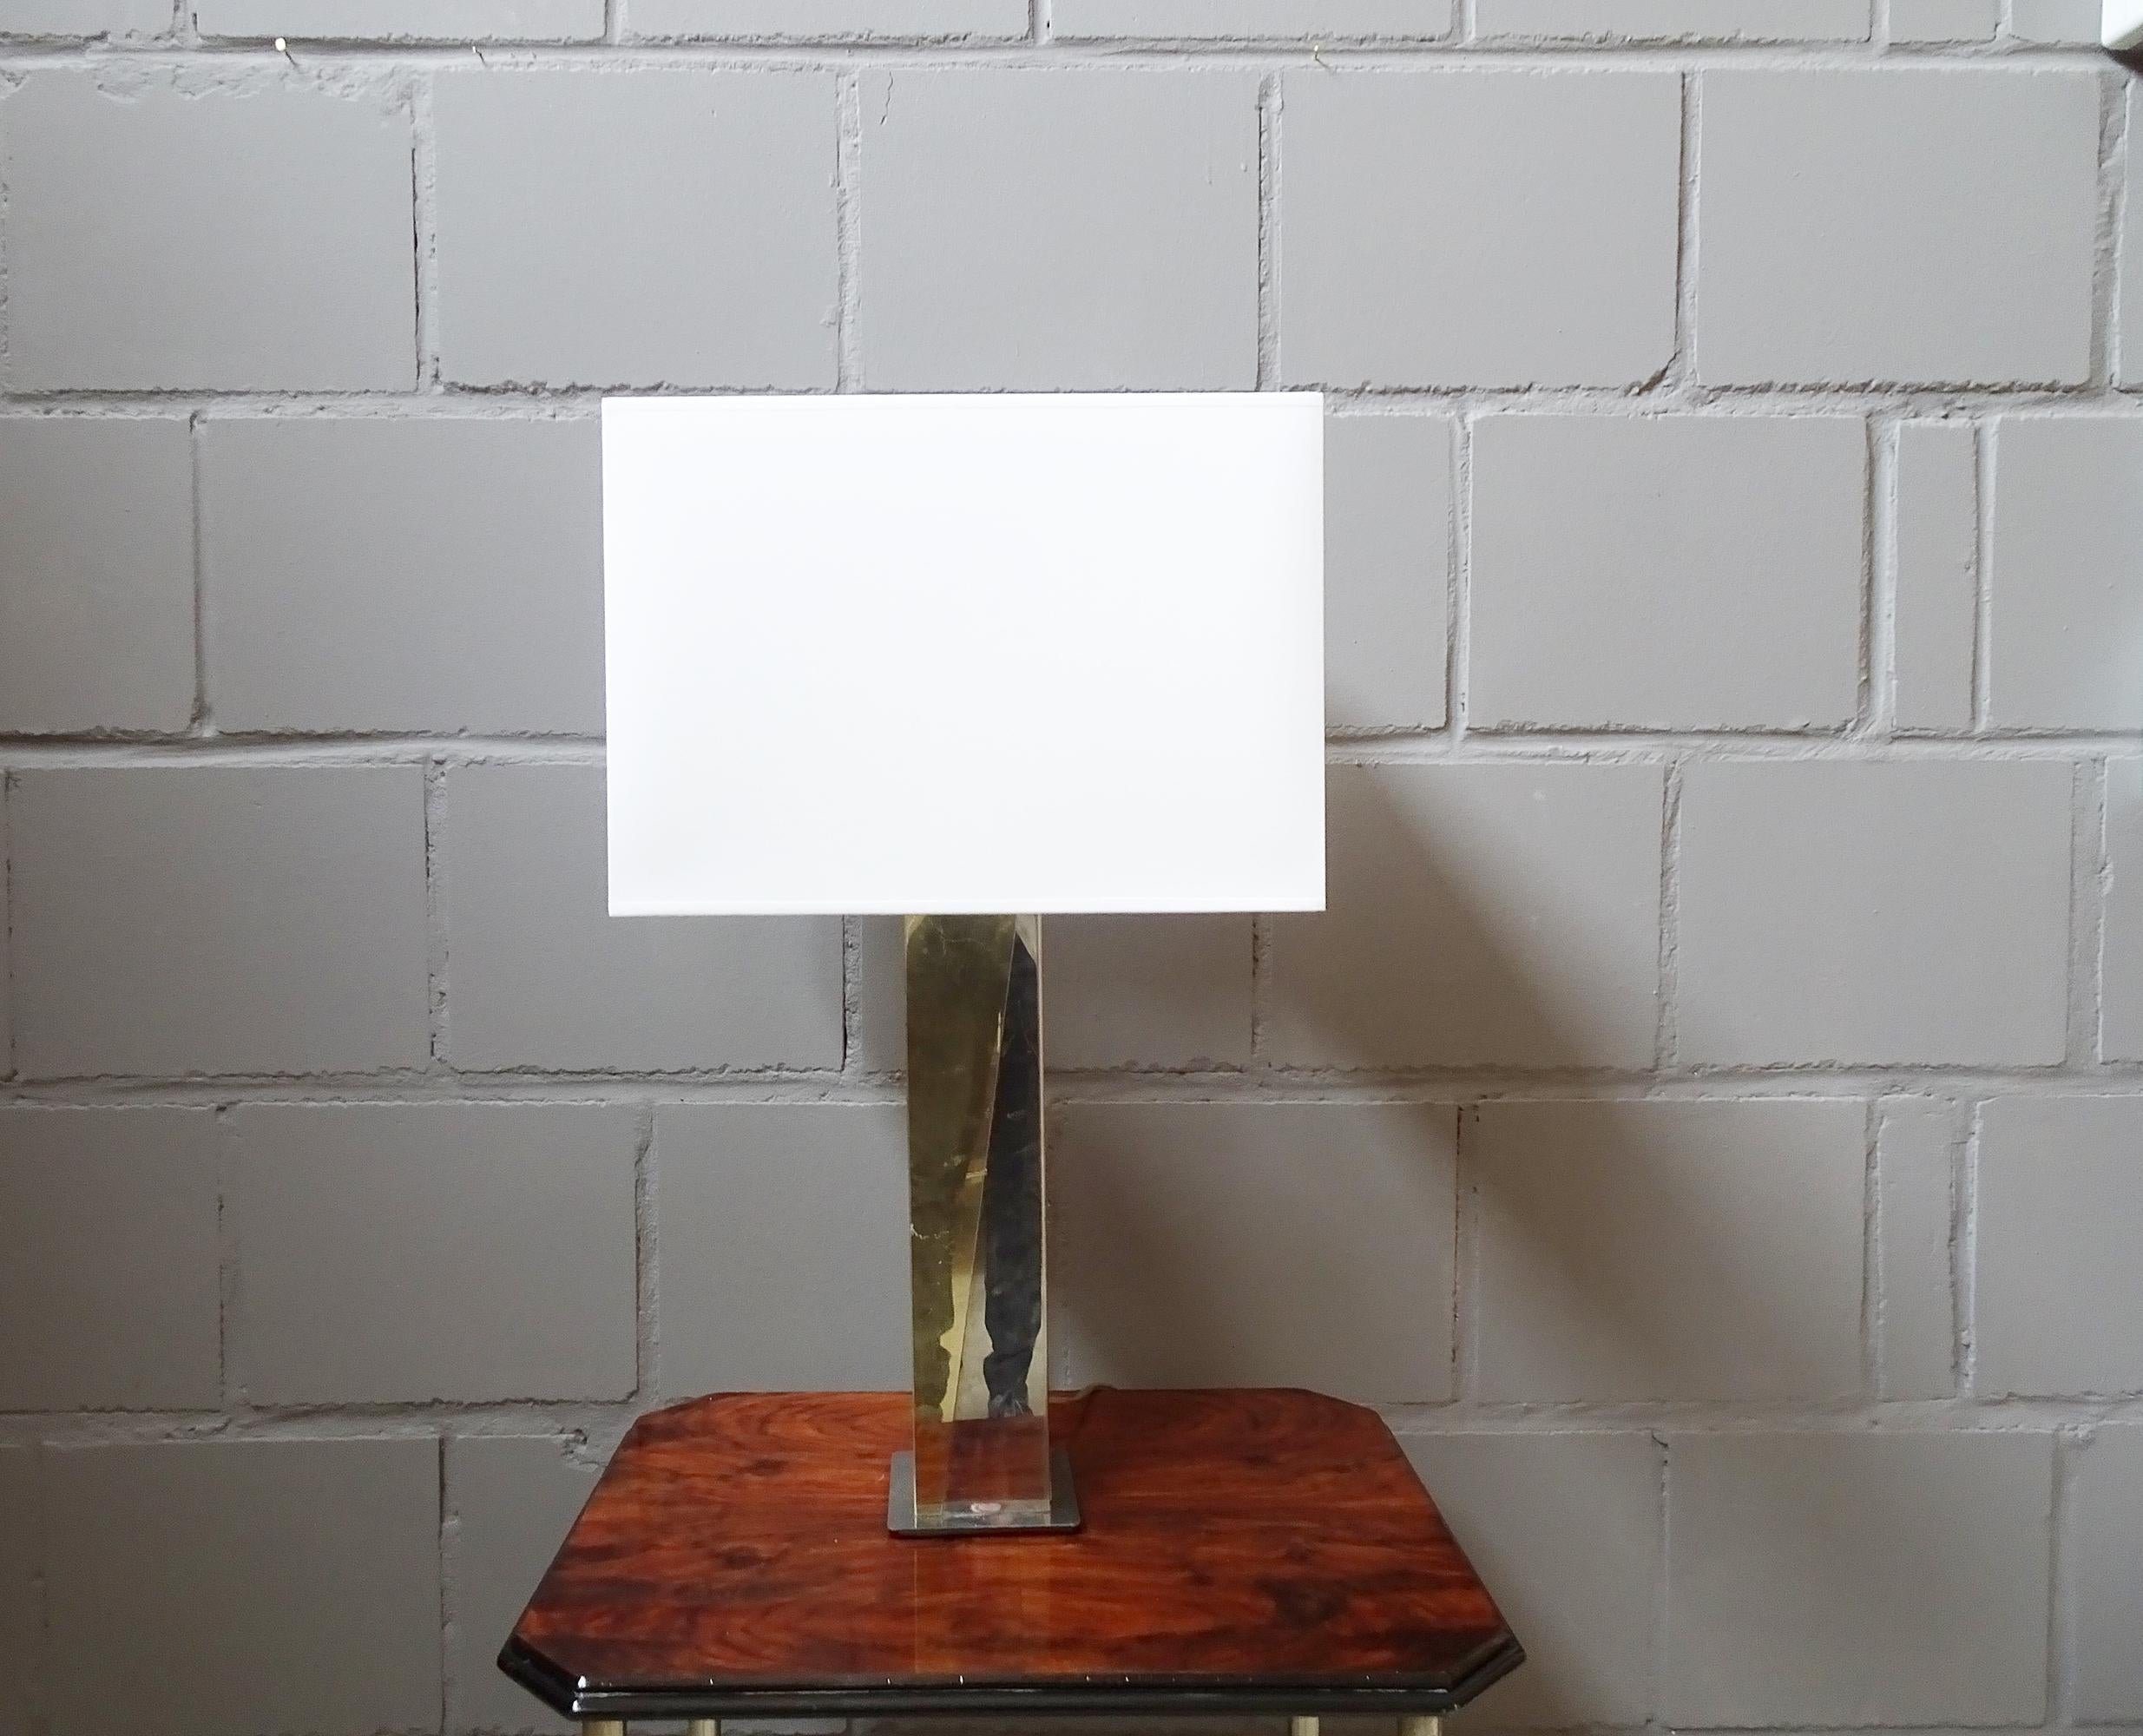 Large modernist table lamp made of gold and silver colored metal. Stylish design from the 1980s in the style of Willy Rizzo or Romeo Rega. Reflective metal in a design typical of the time in a long square shape. The lamp looks sculptural and is a